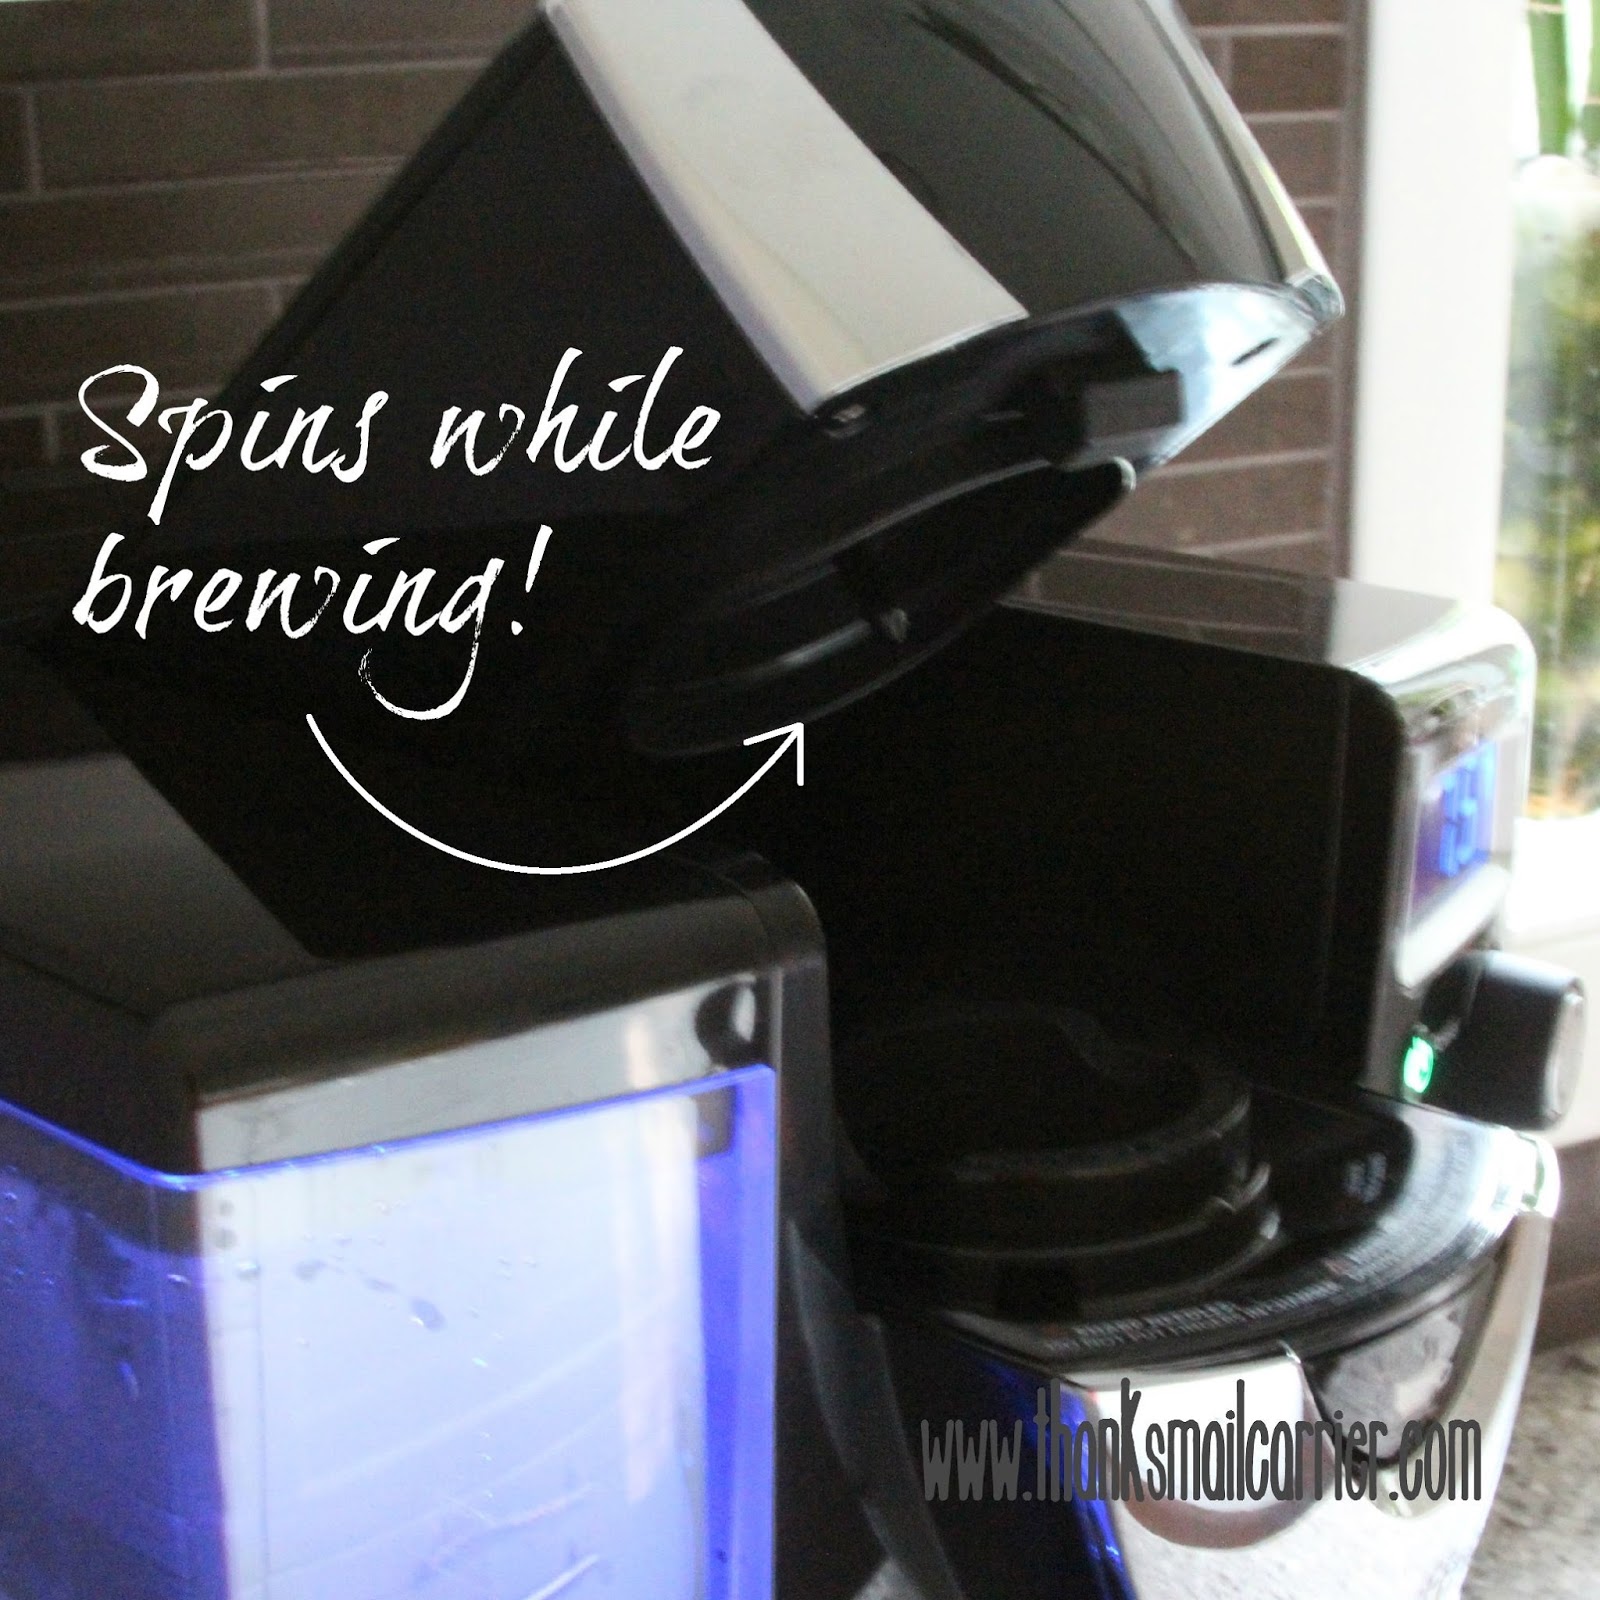 Innovative Coffee Maker with SpinBrew Technology - iCoffee Opus